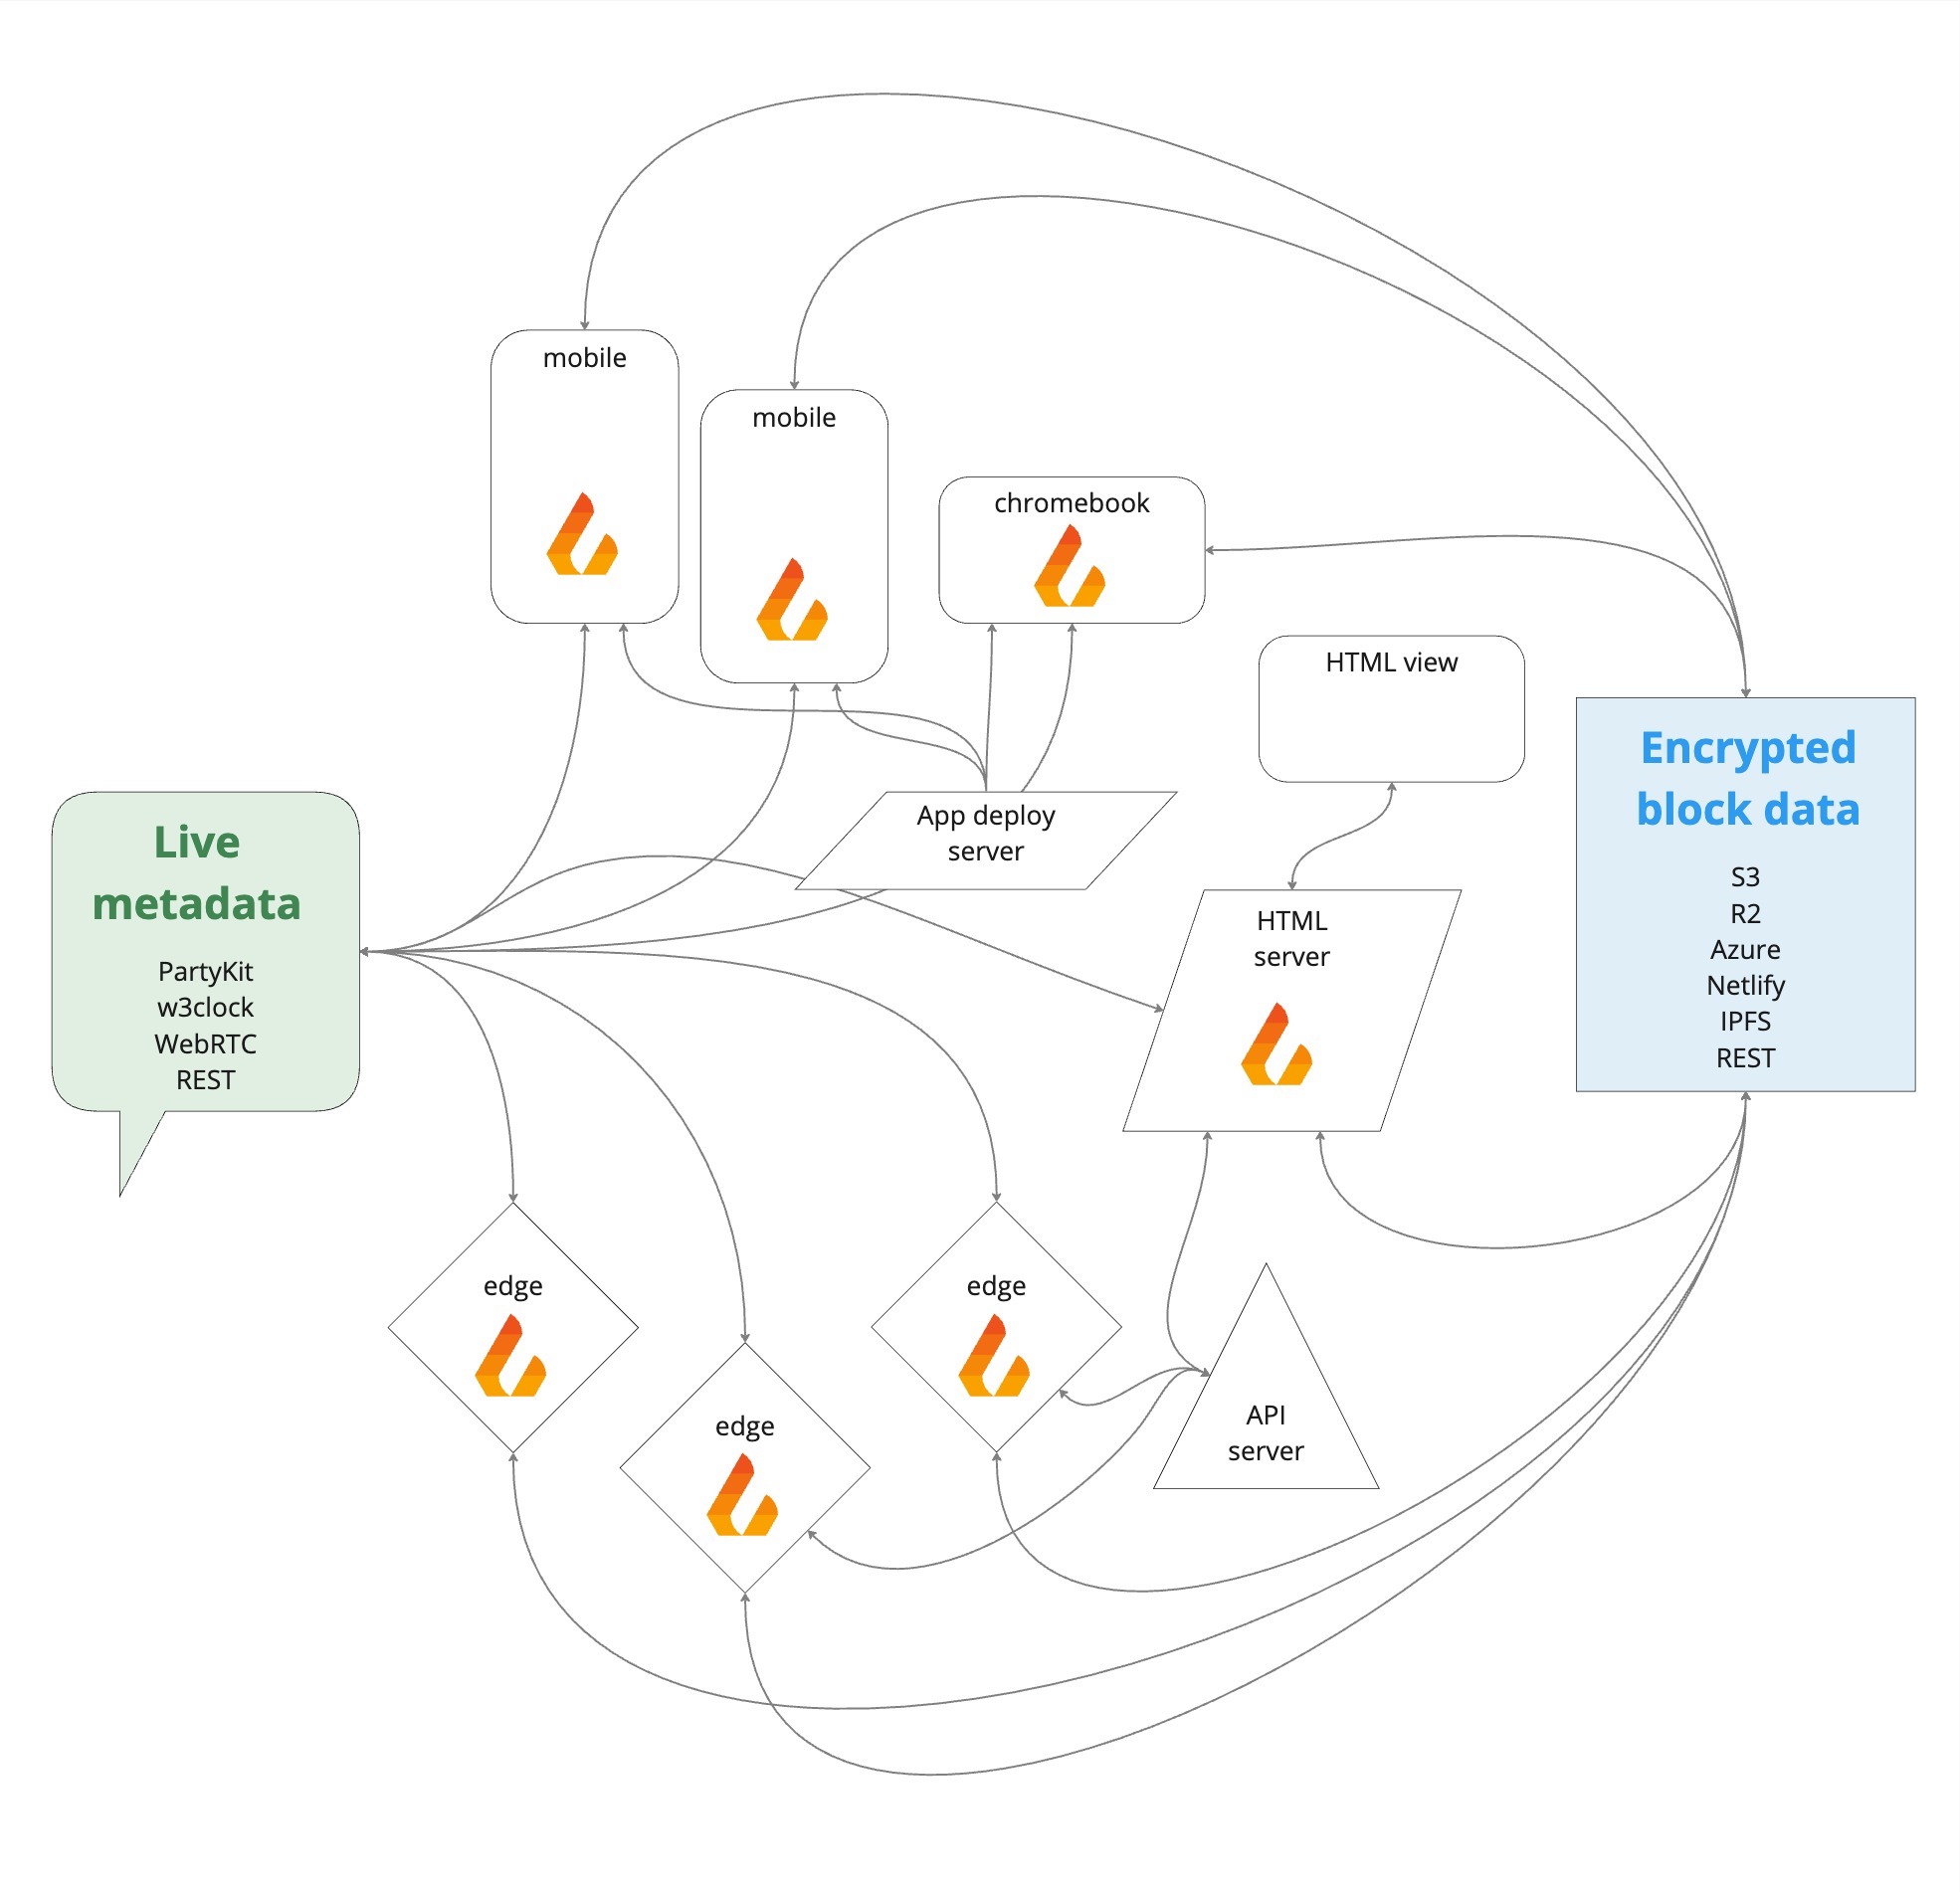 Architecture with Fireproof running on web servers, edge functions, and user devices